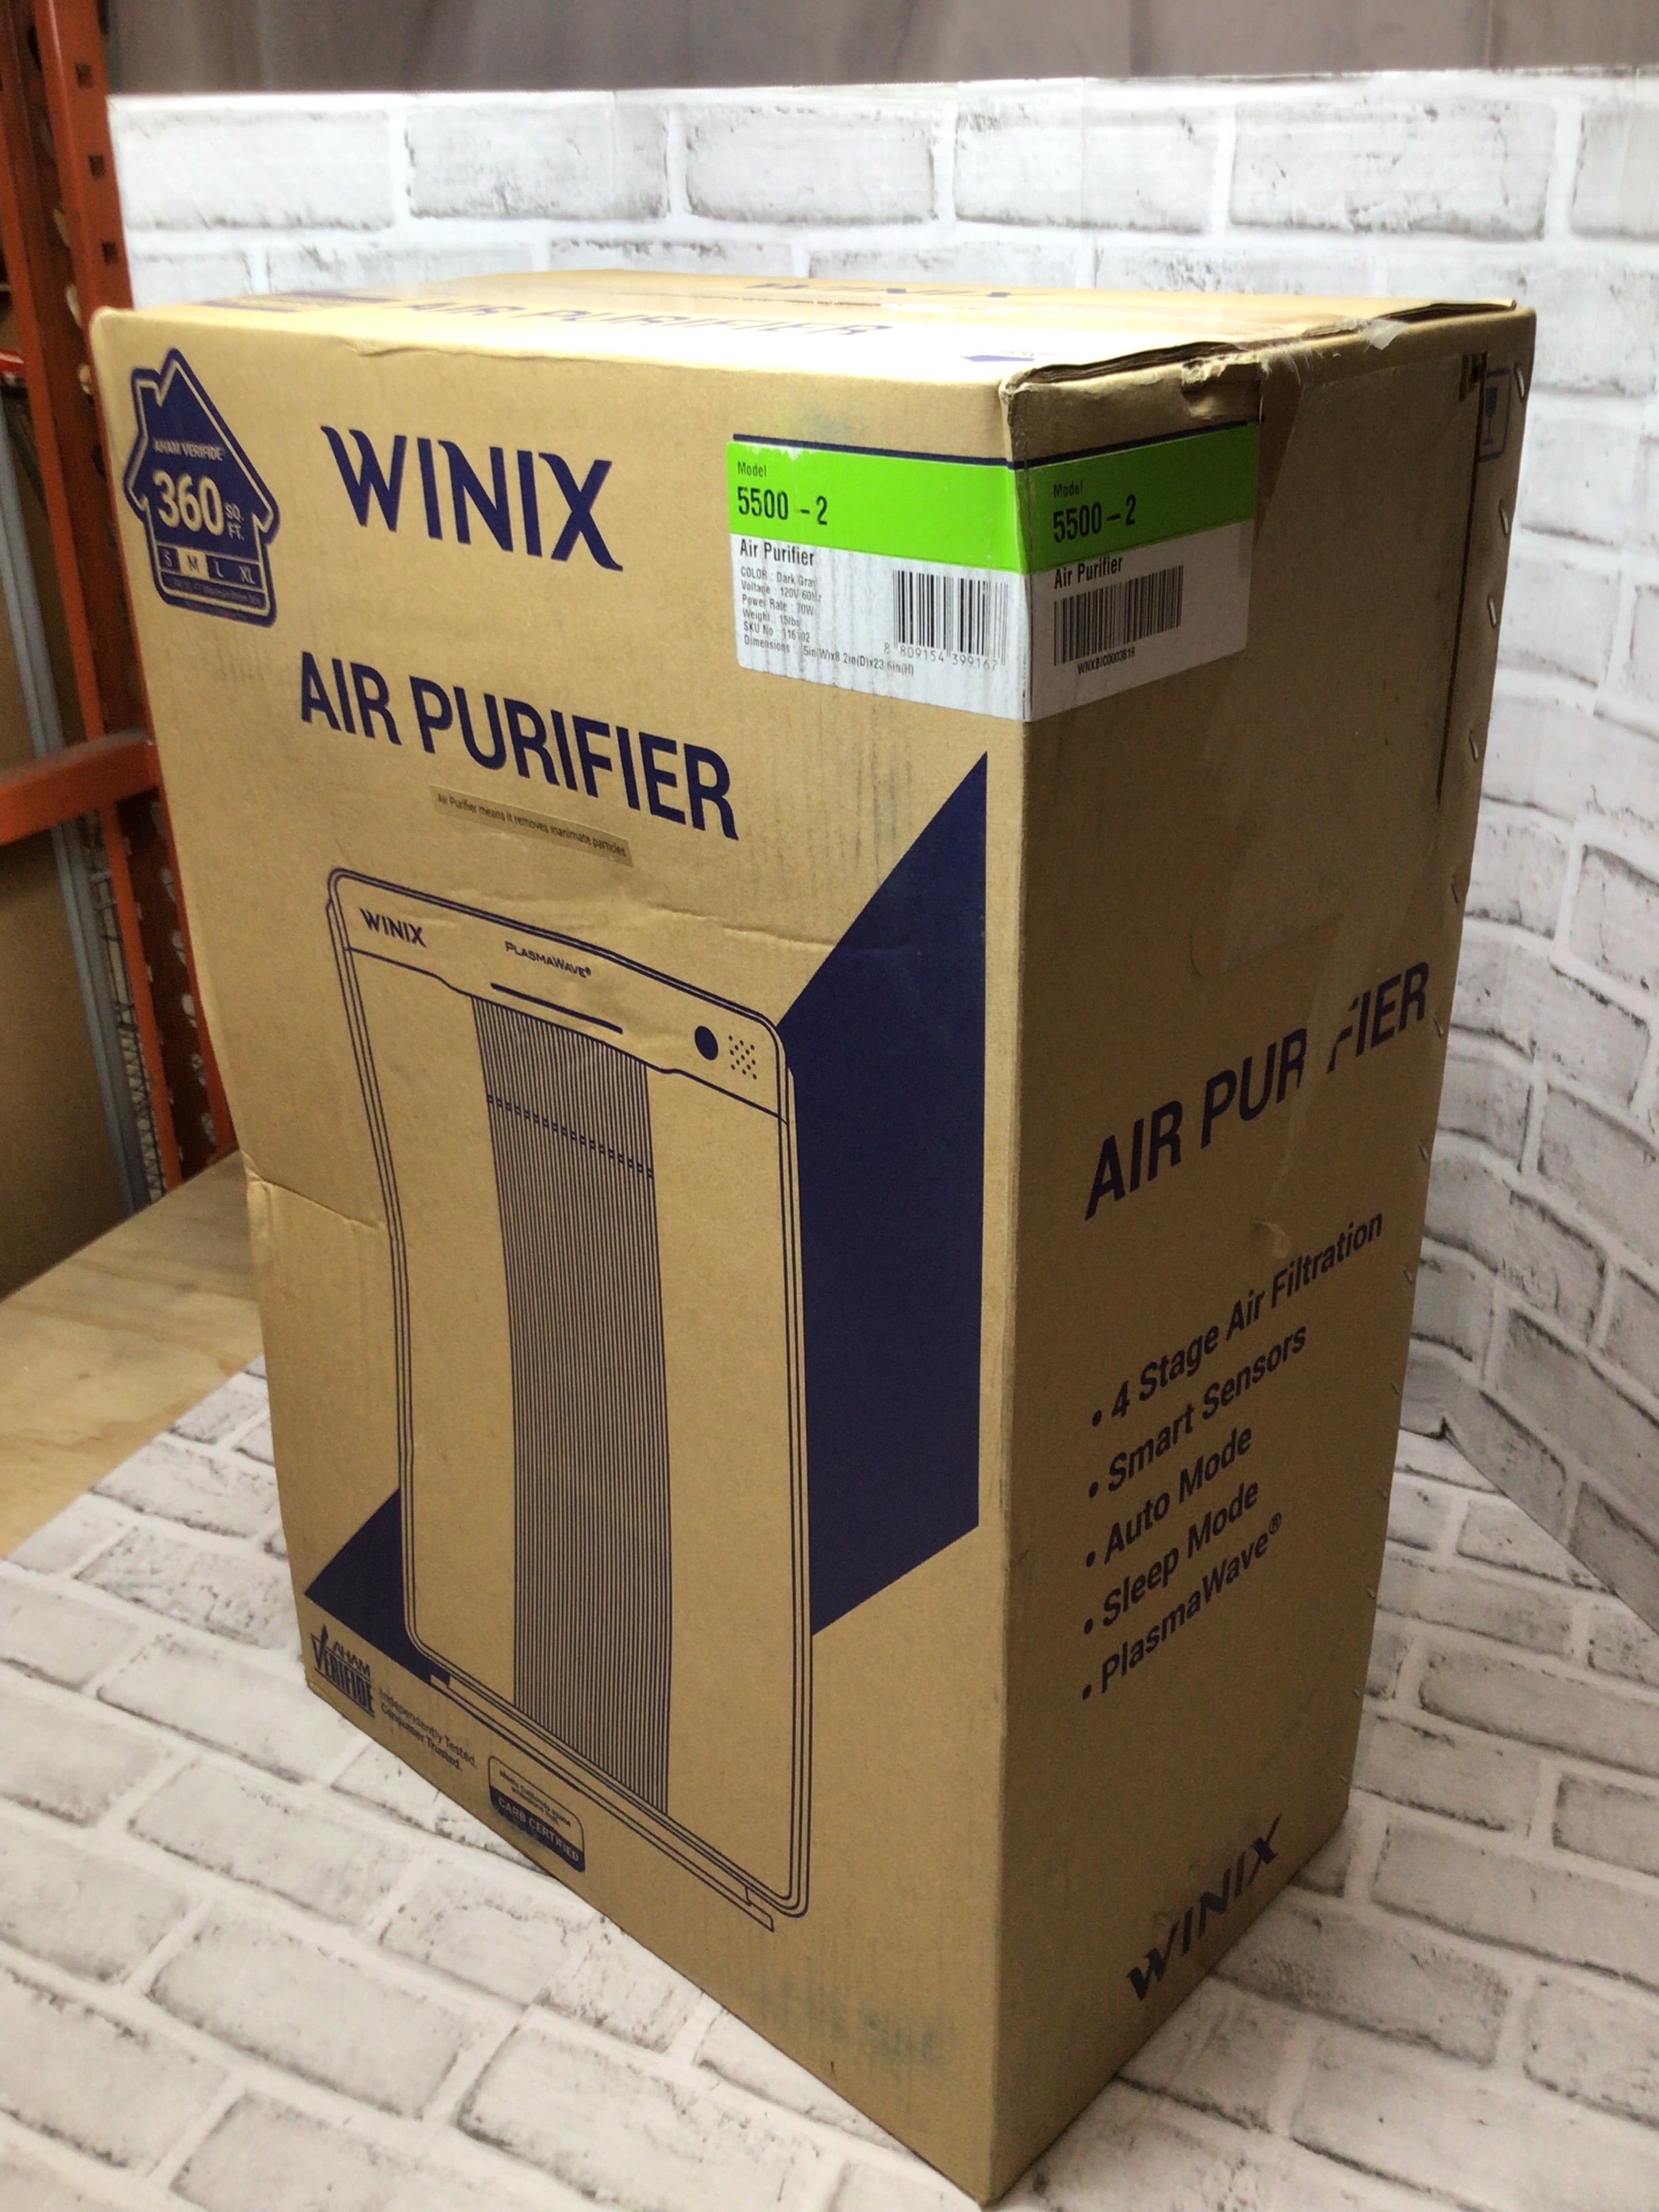 Winix 5500-2 Air Cleaner with Plasma Wave Technology and 4-stage air cleaning (8093188653294)